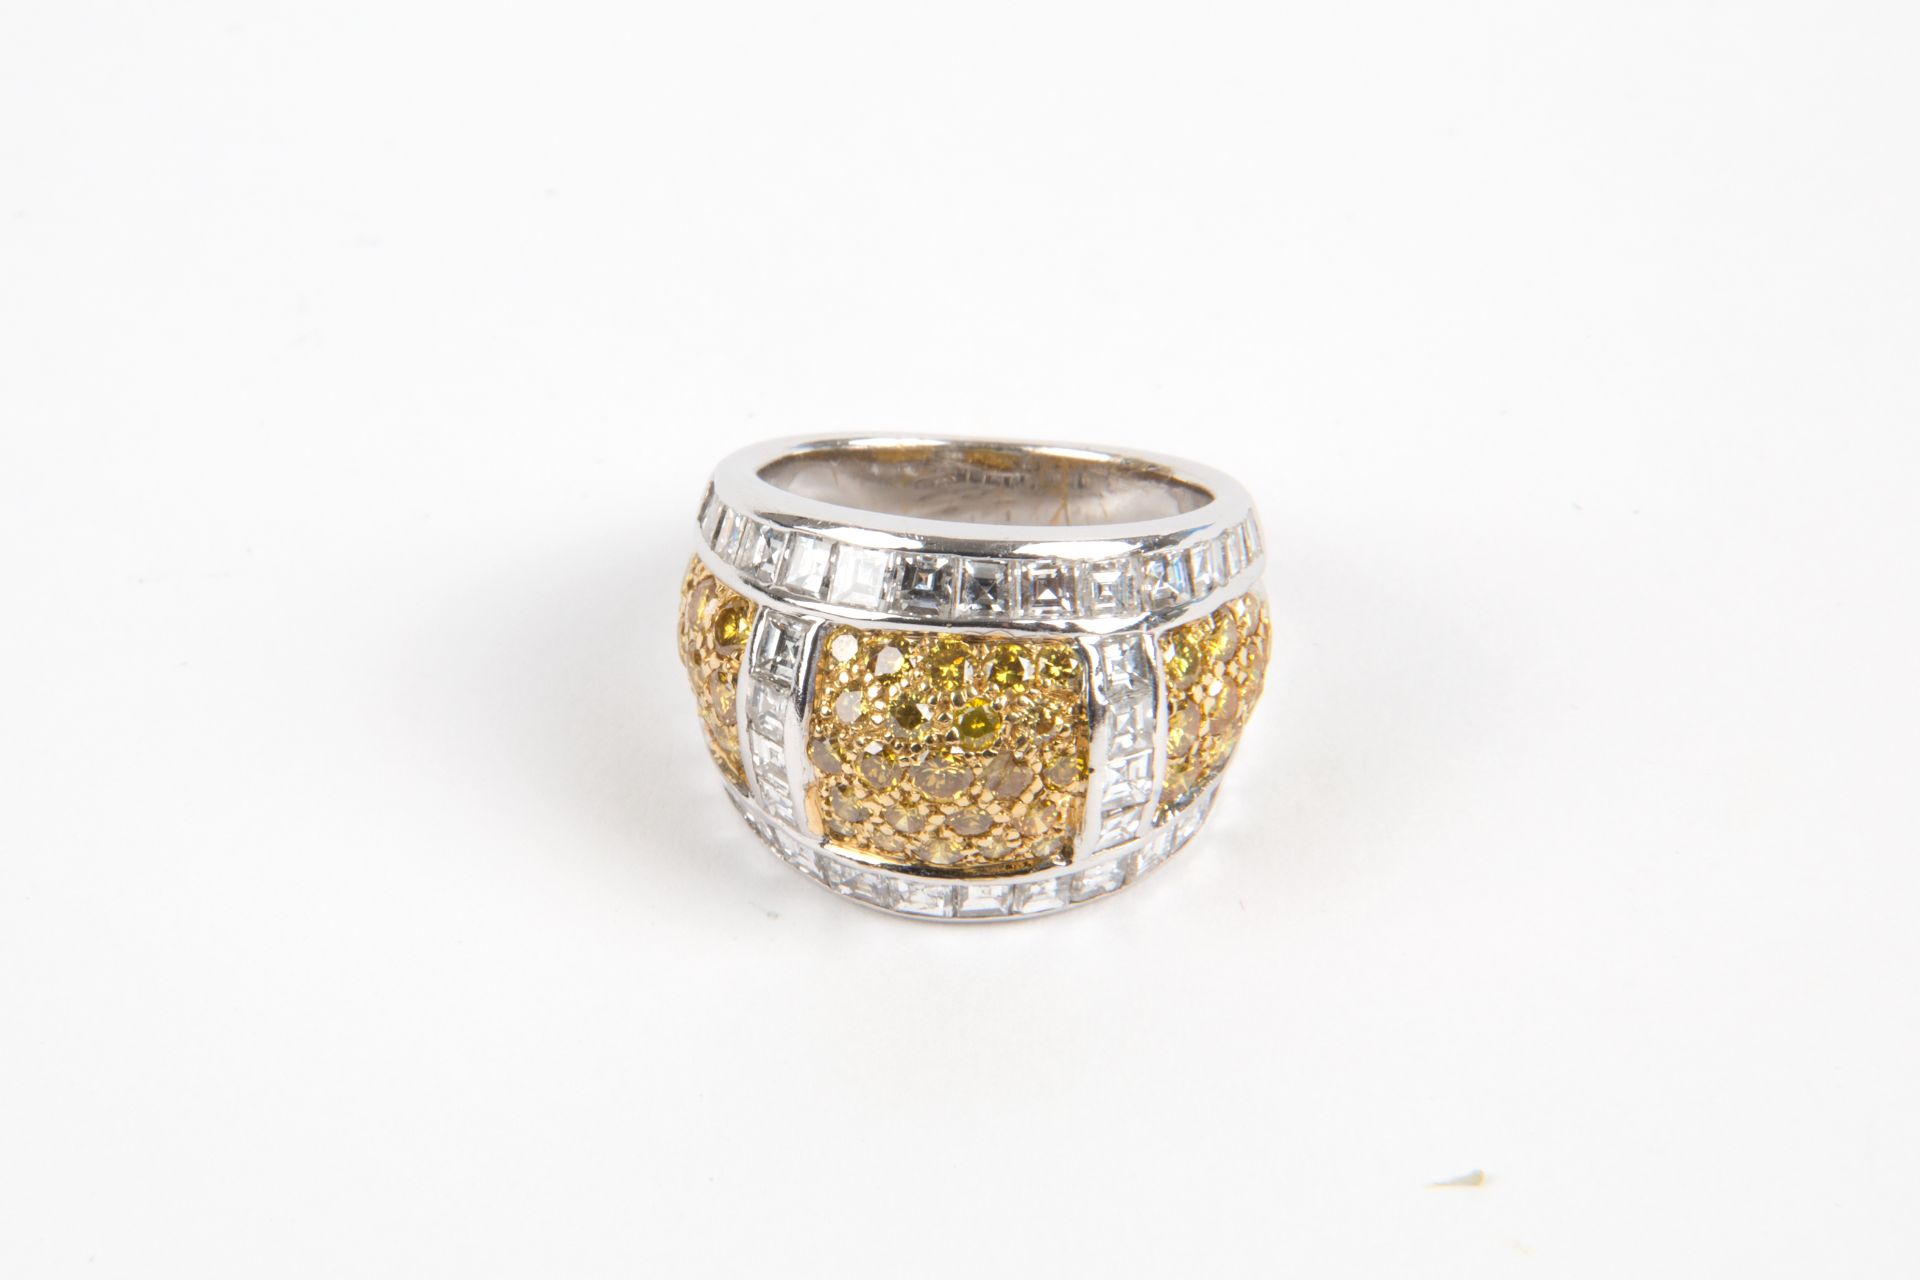 White gold ring with fancy yellow diamonds and natural diamonds - Image 2 of 2